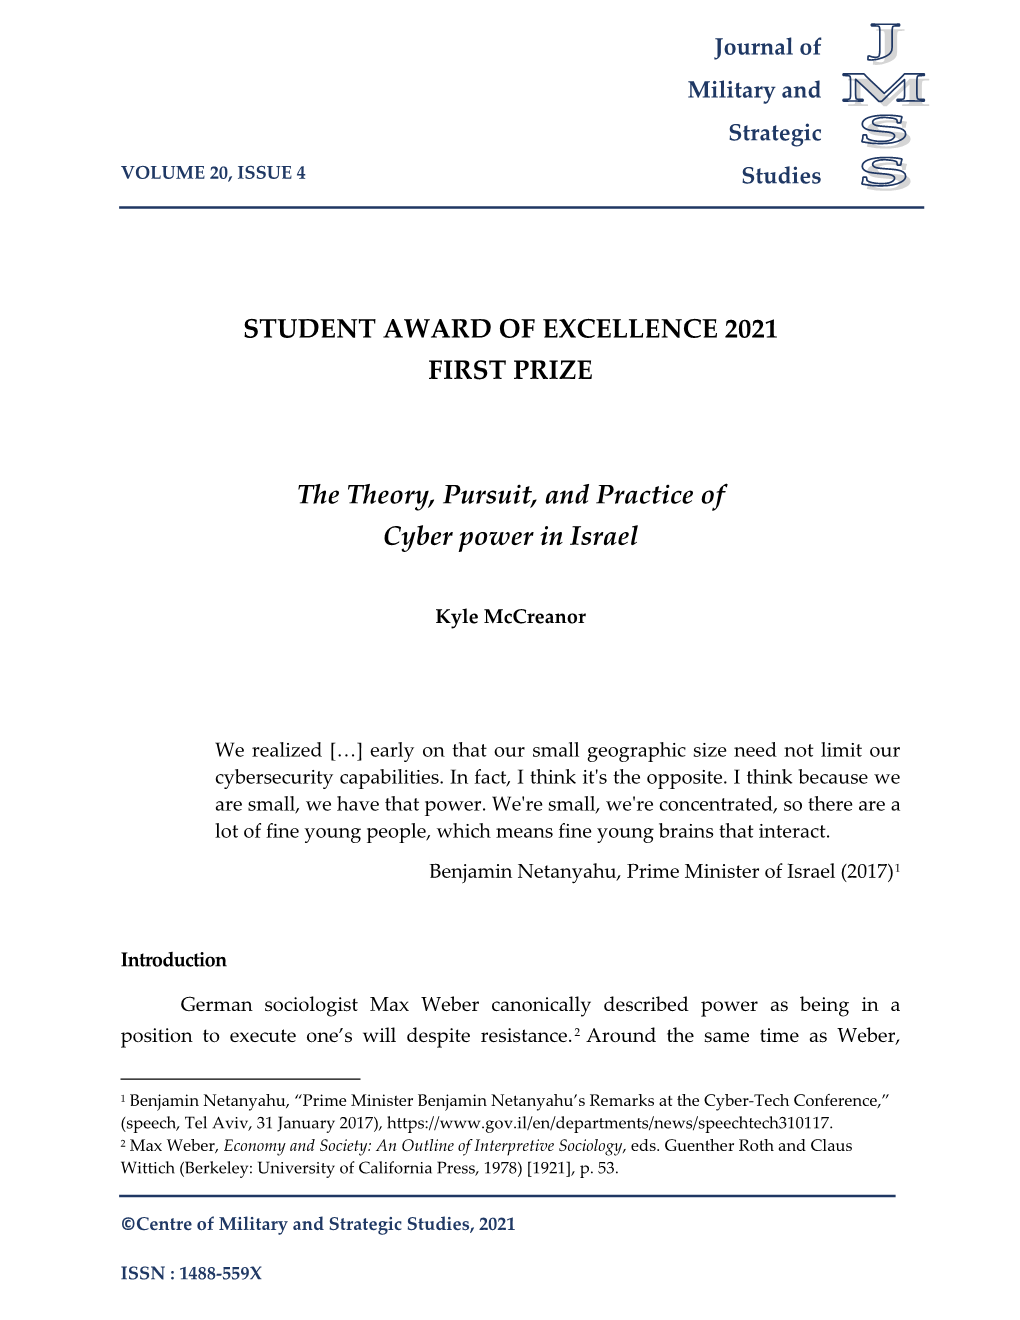 STUDENT AWARD of EXCELLENCE 2021 FIRST PRIZE the Theory